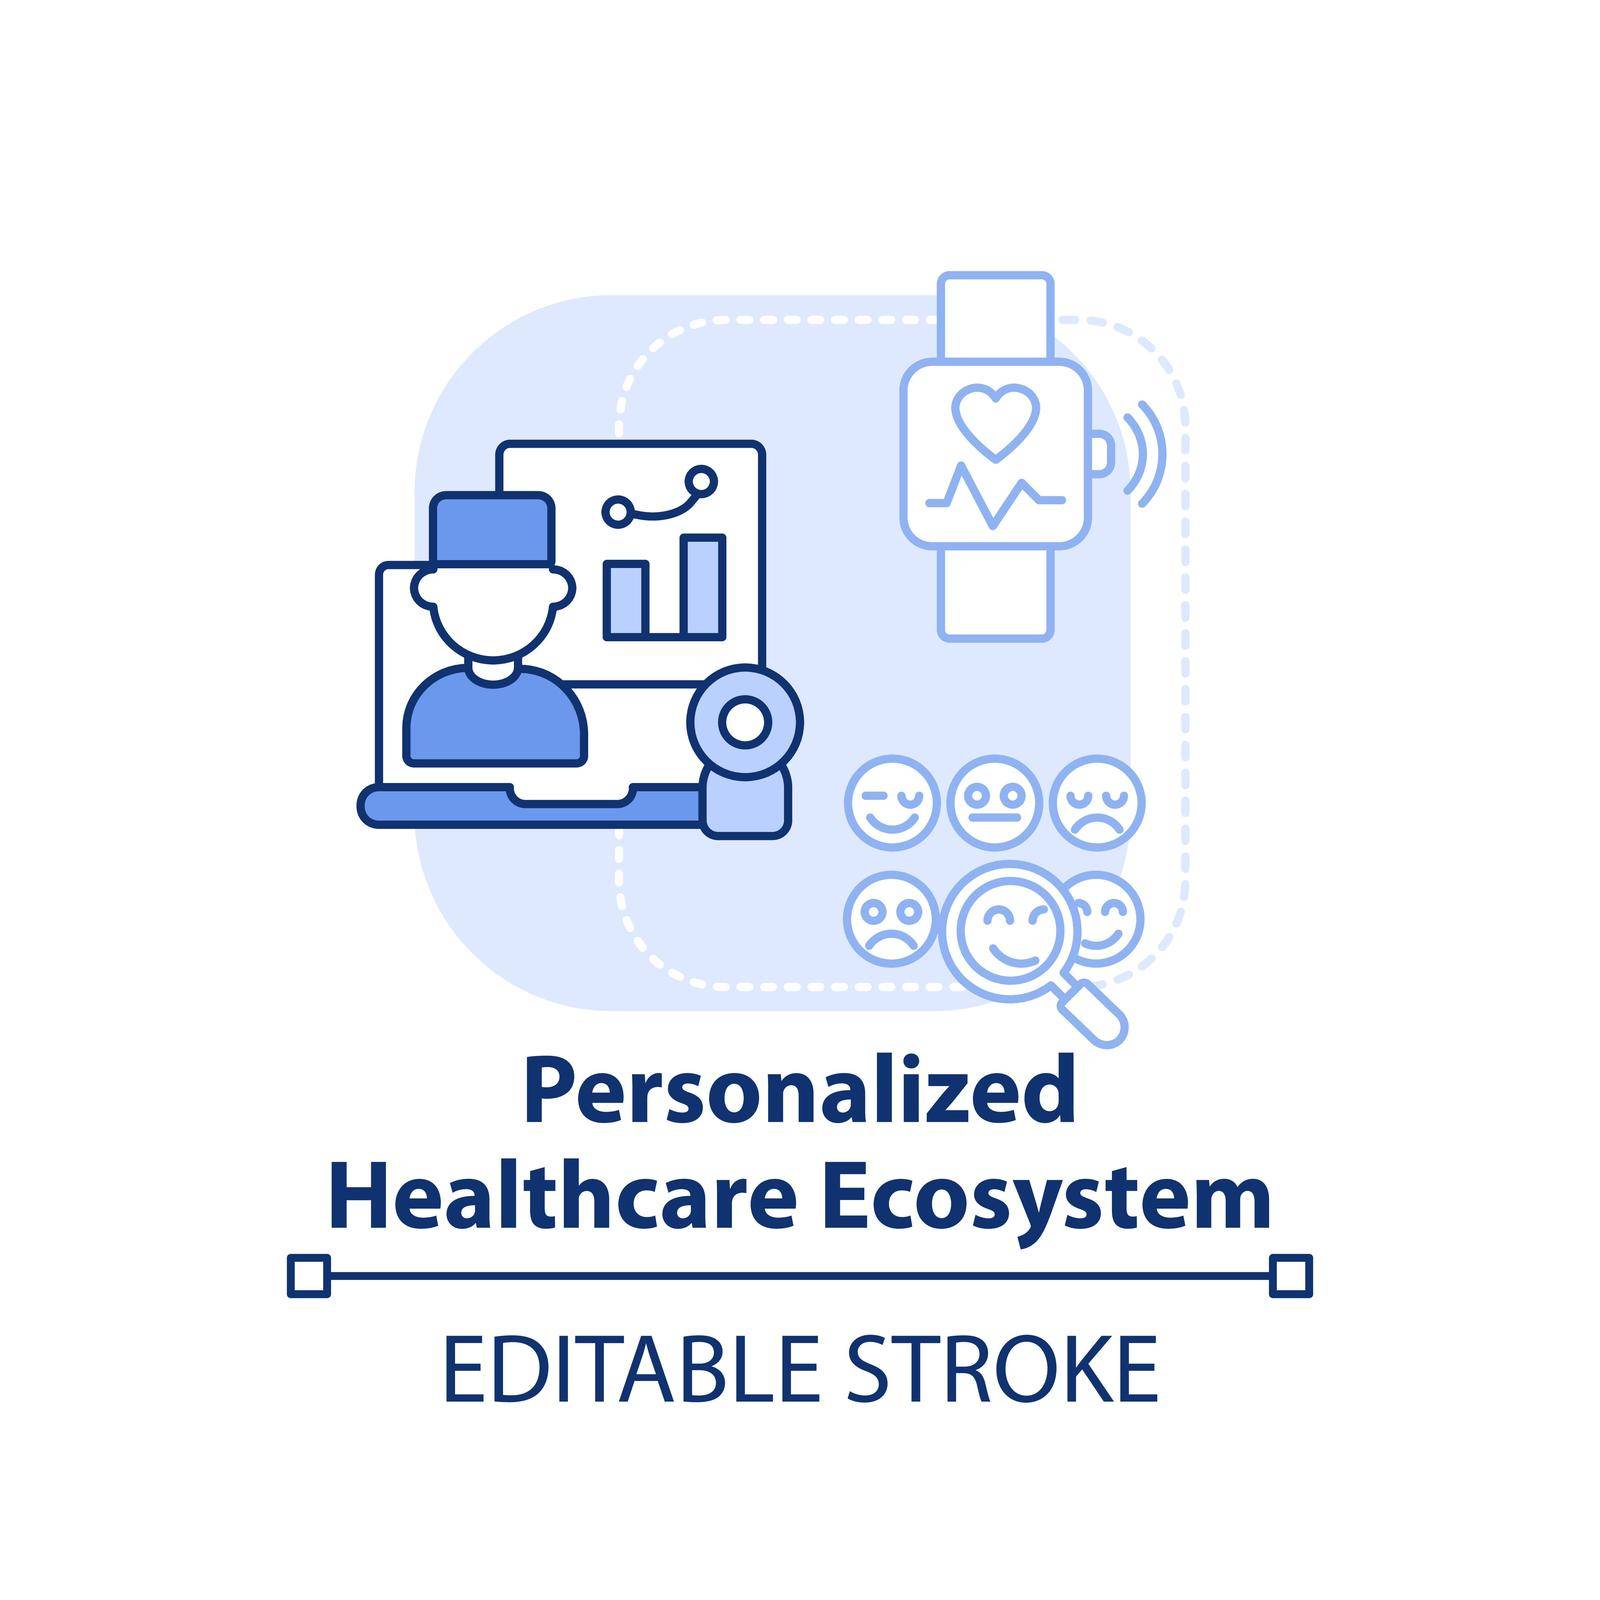 Personalized healthcare ecosystem light blue concept icon by bsd